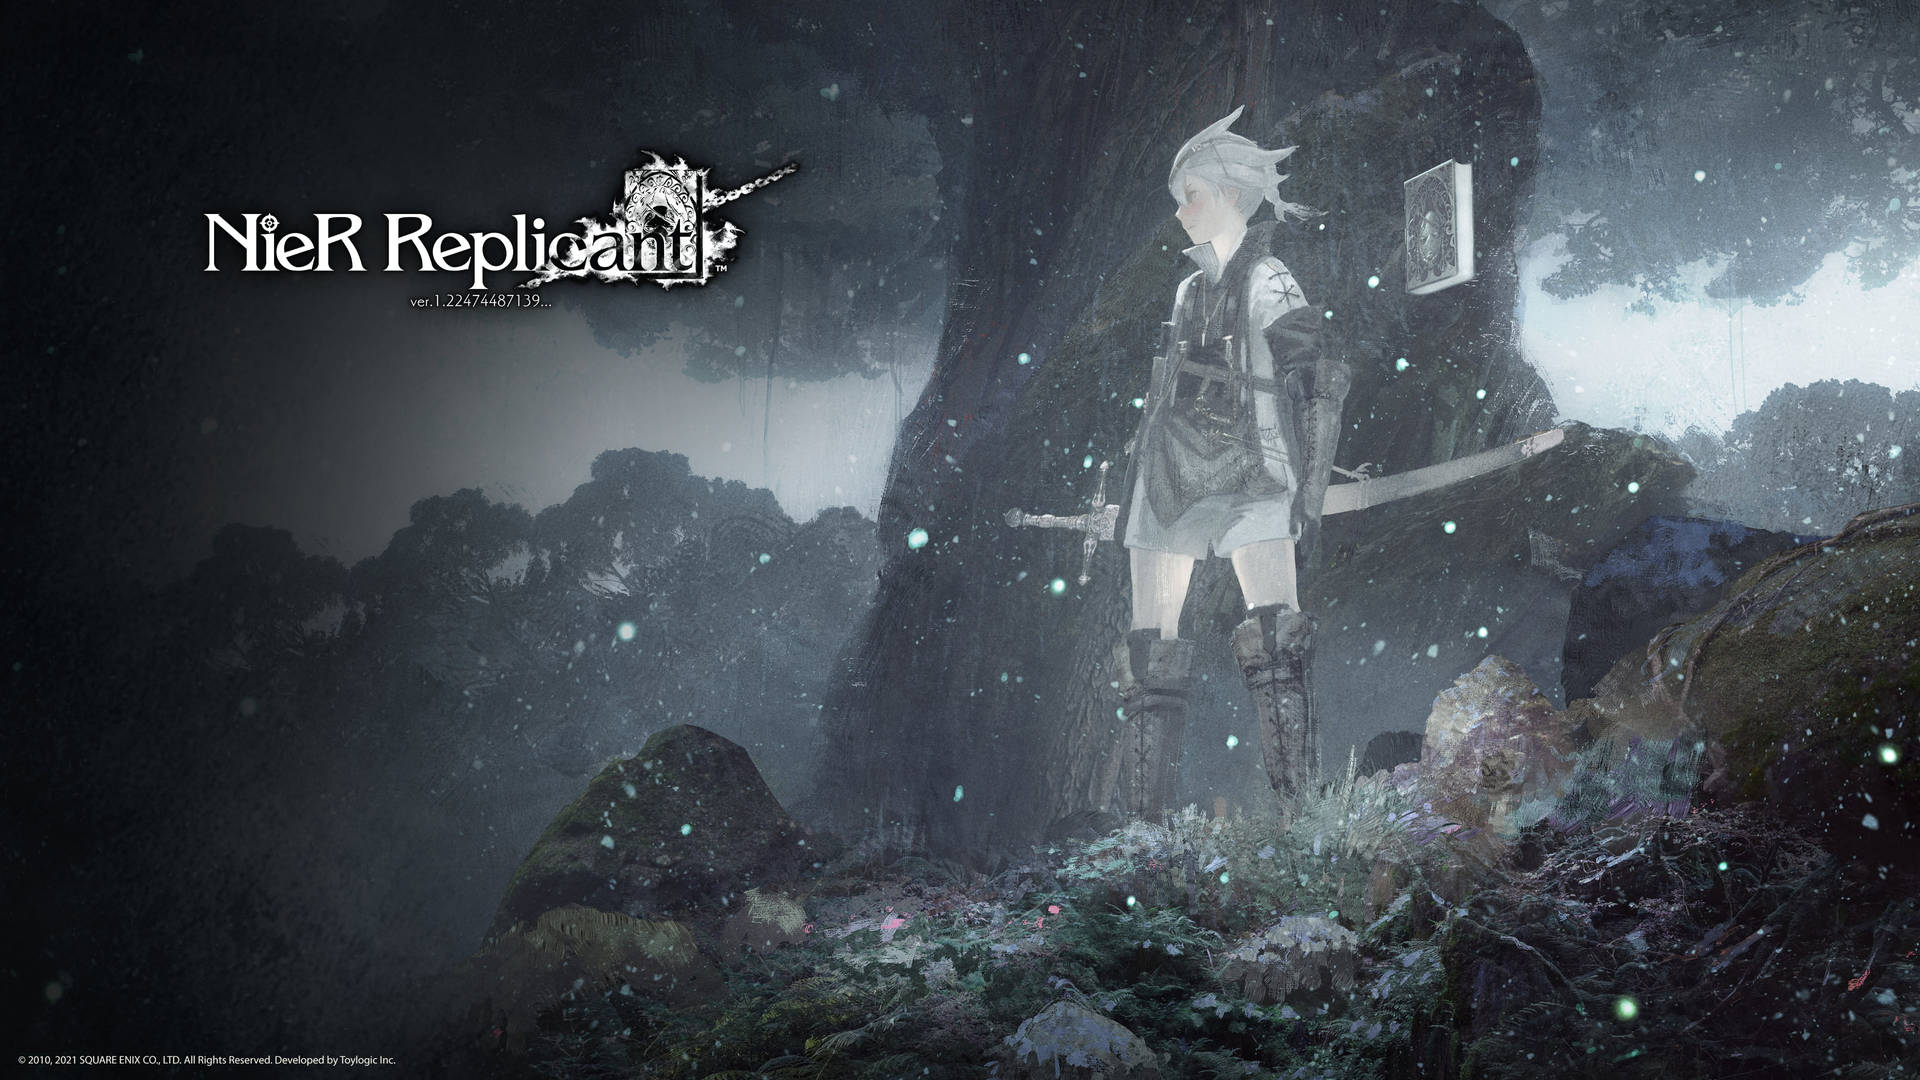 NieR Replicant Forest Of Myth Wallpaper